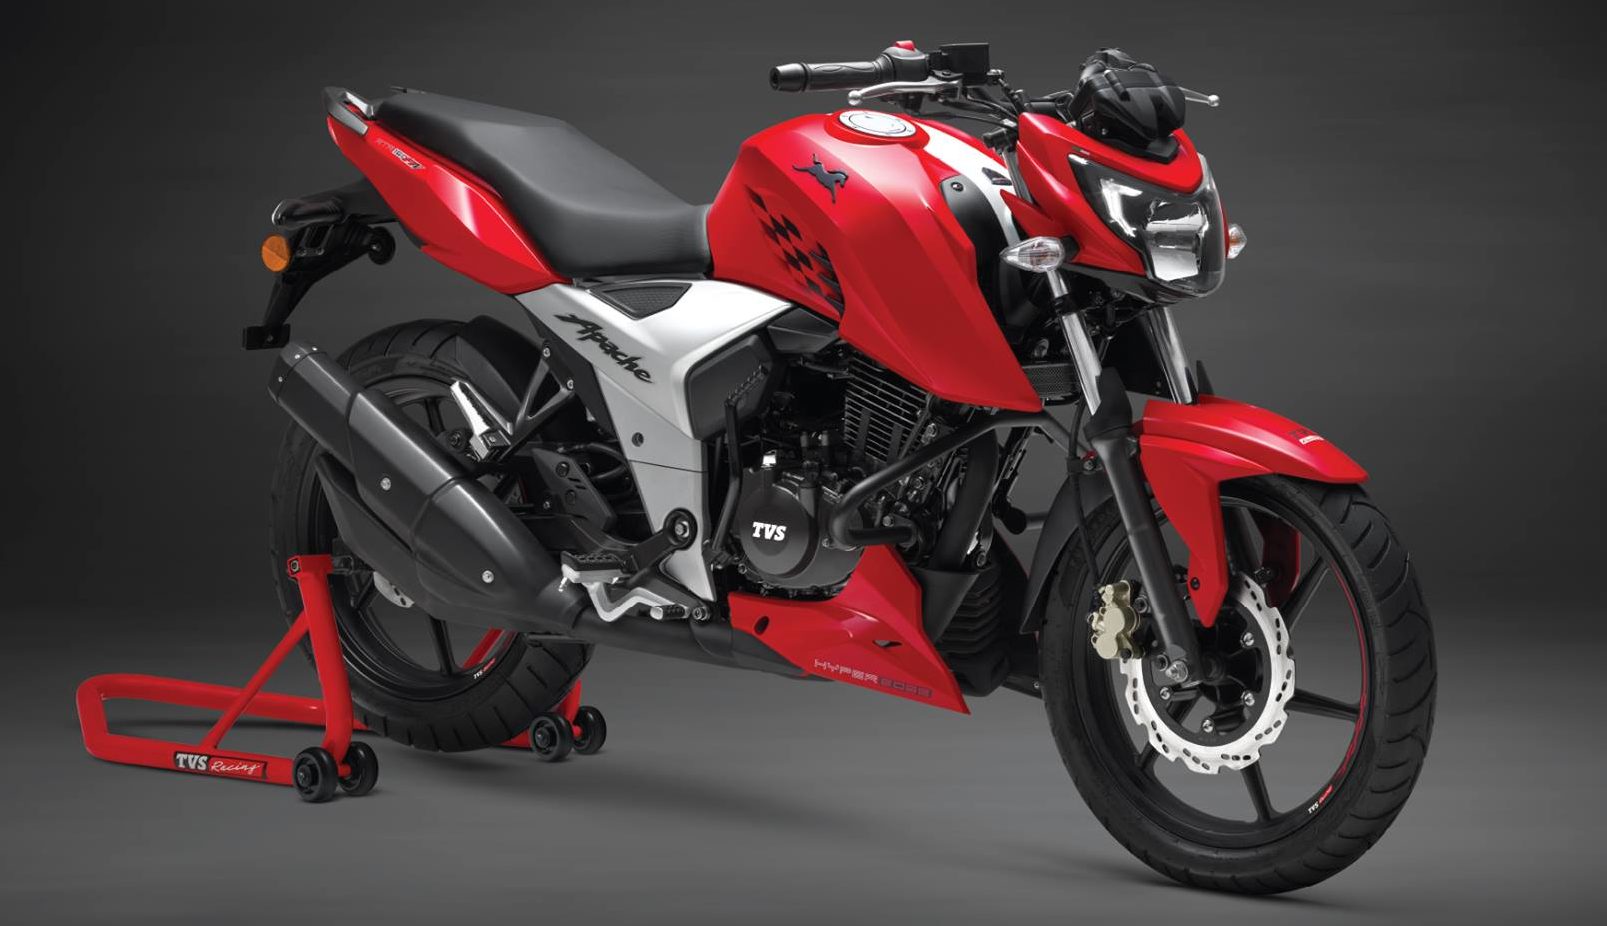 Tvs Apache Rtr 160 4v Launched In Bangladesh Motoroids